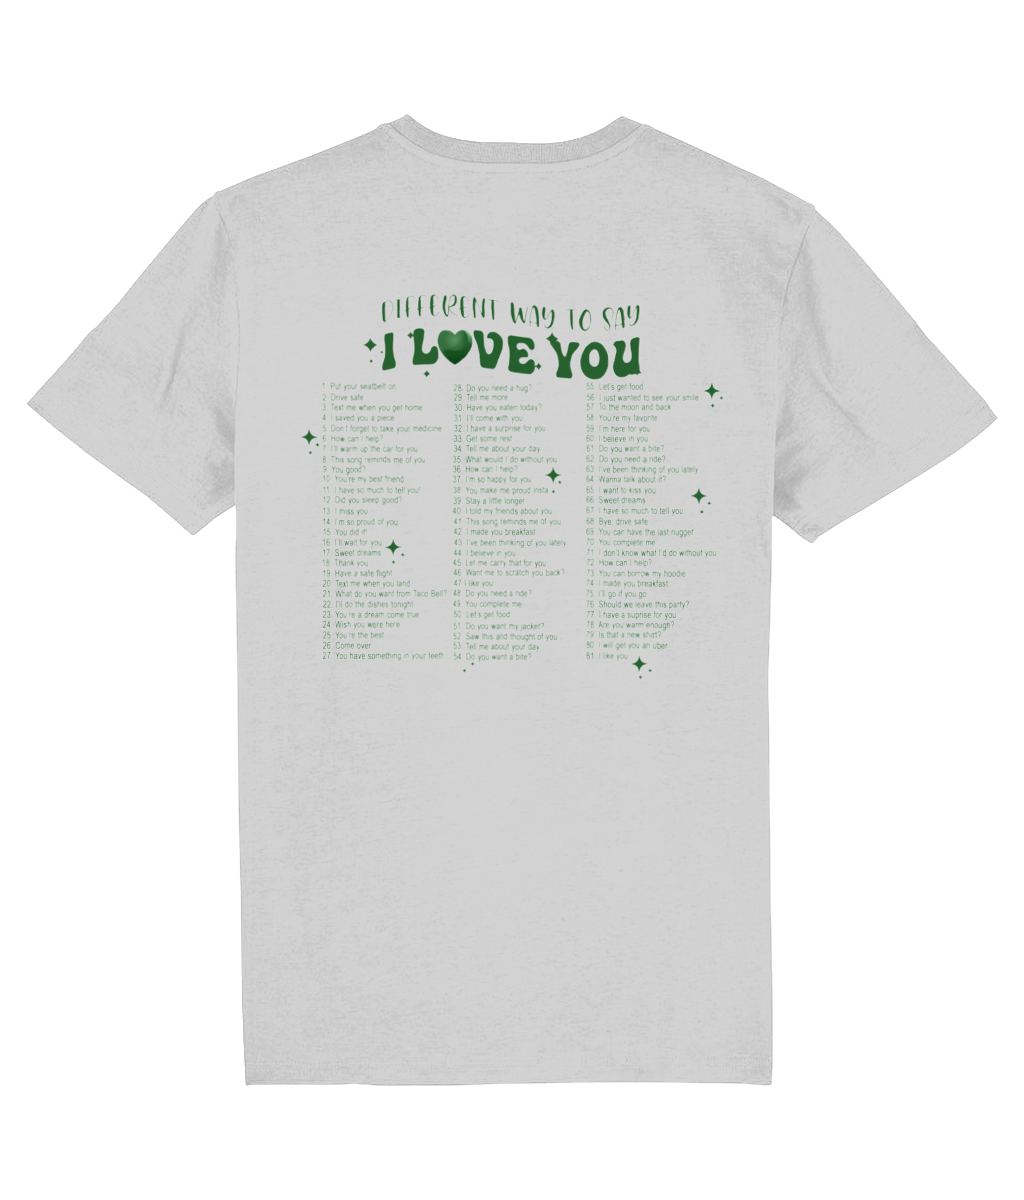 DIFFERENT WAYS TO SAY I LOVE YOU SHIRT